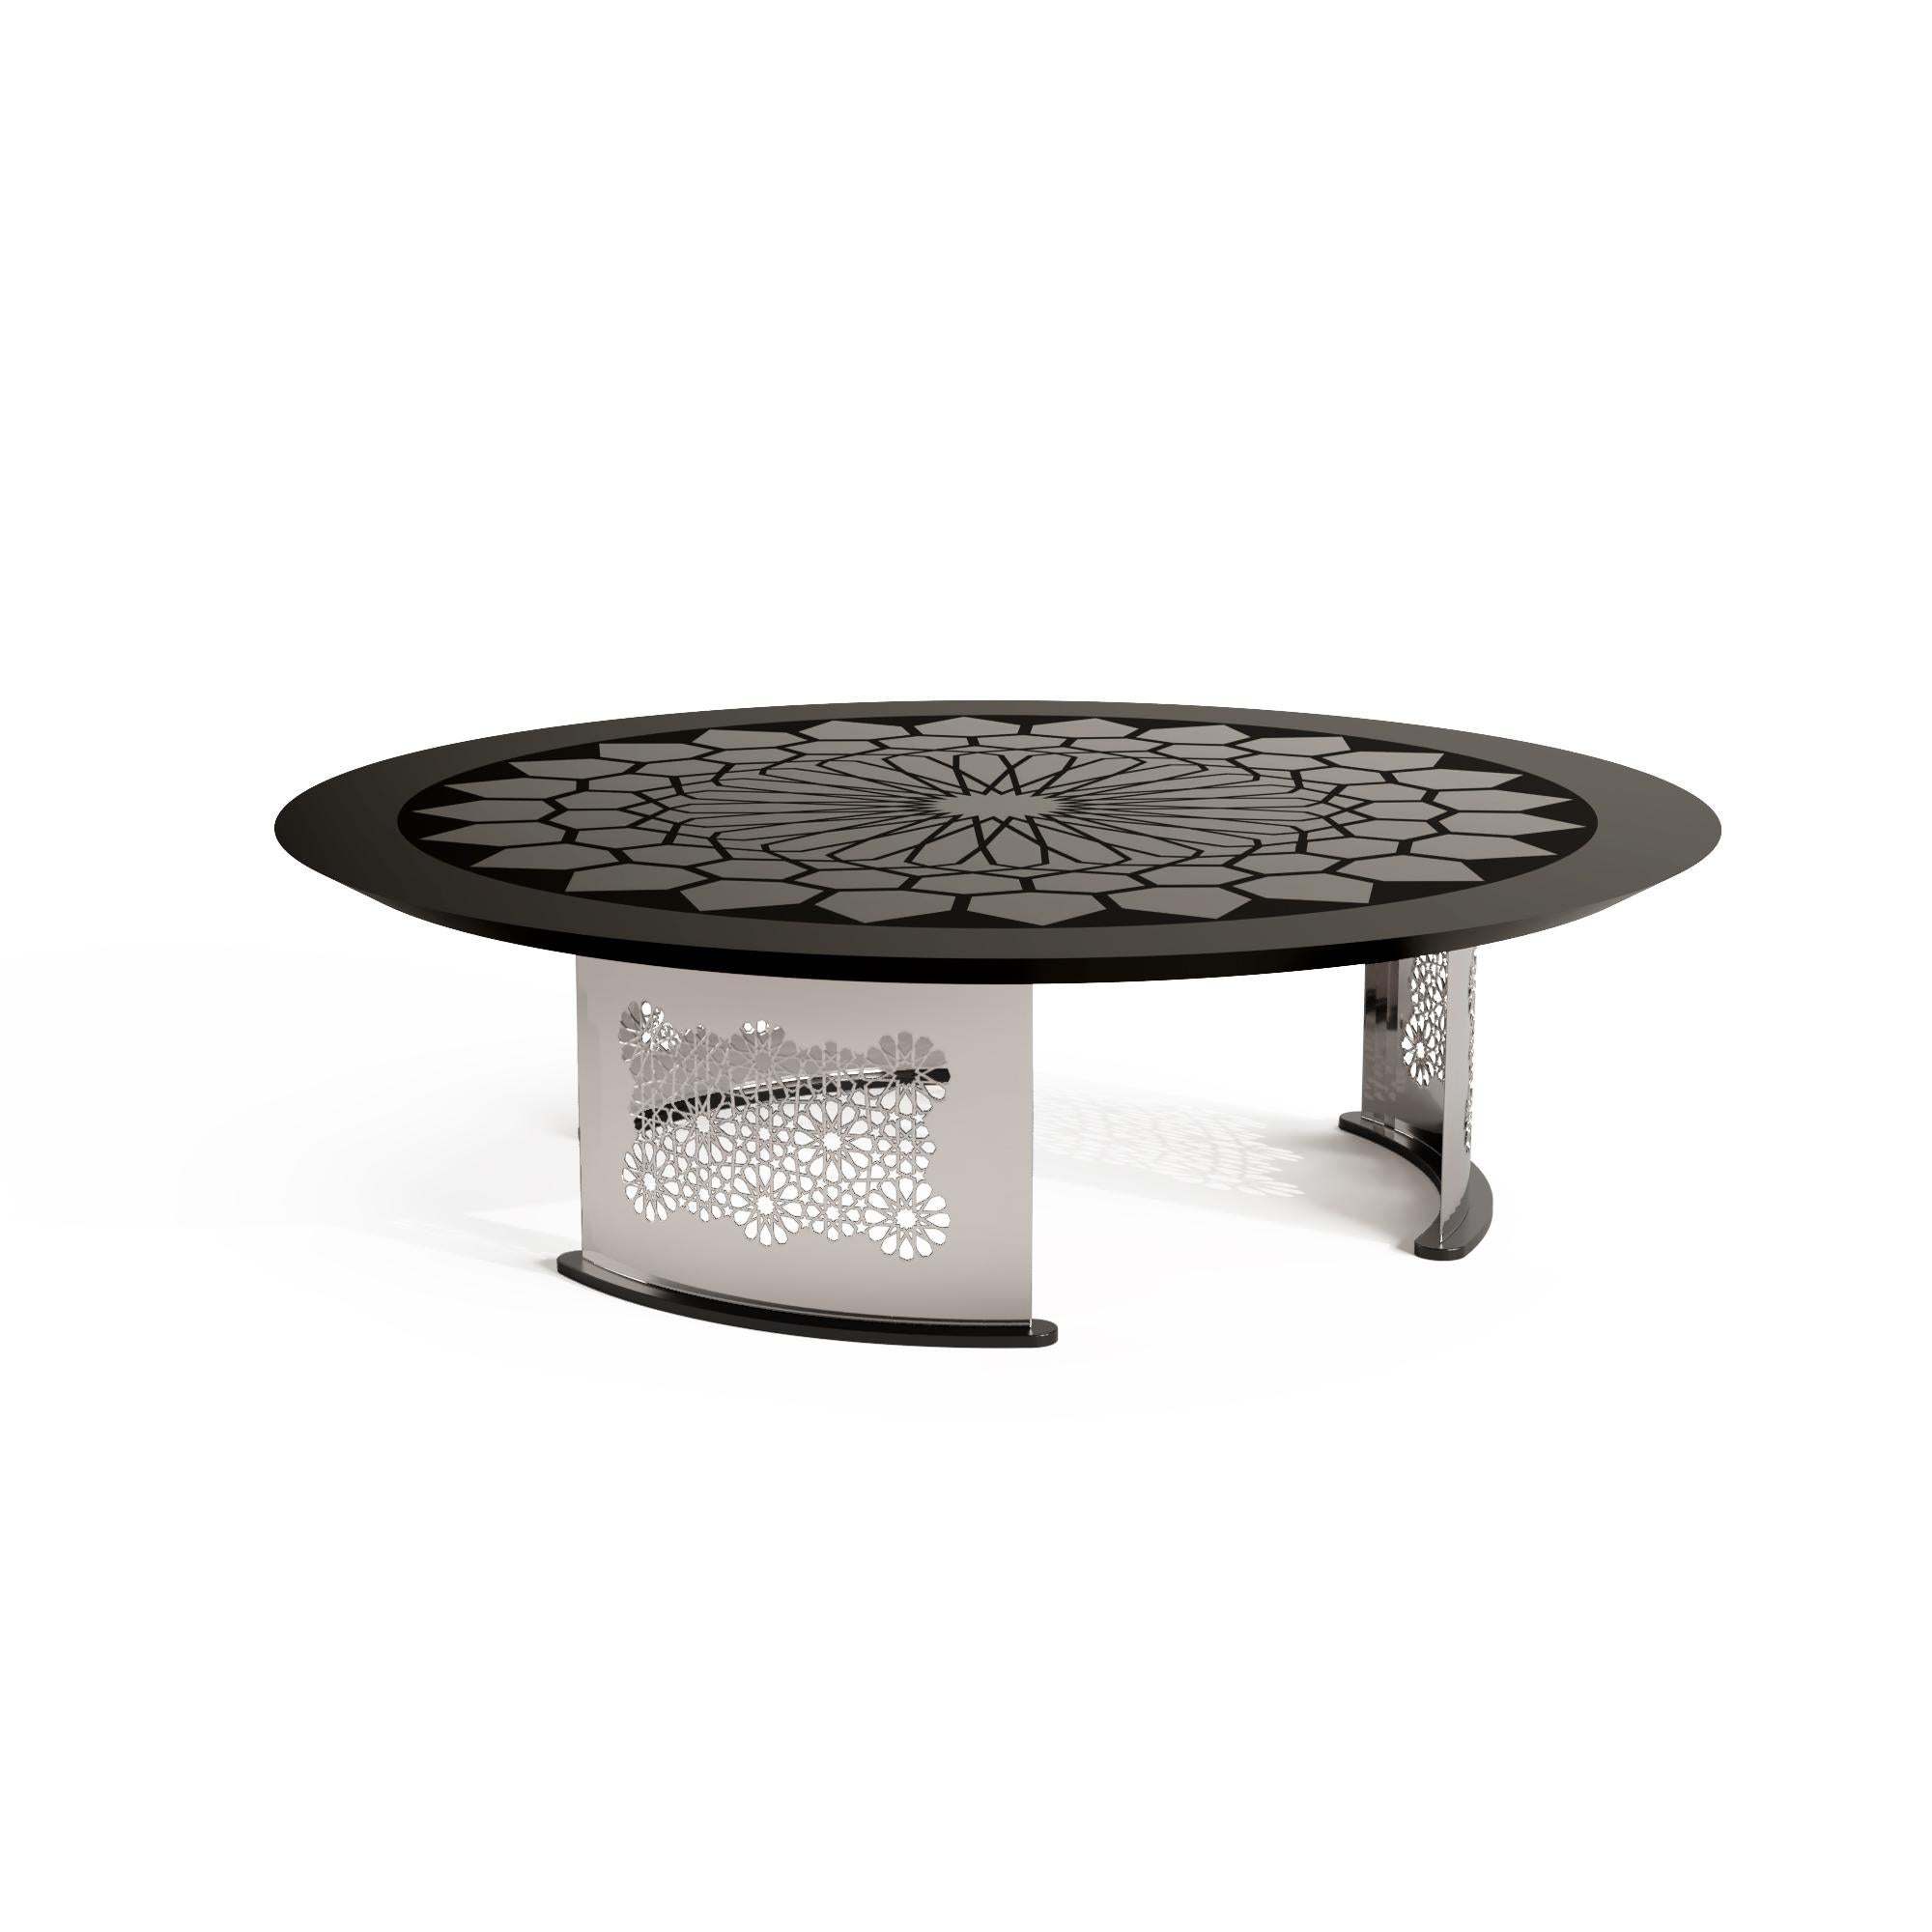 21st Century Modern Center Coffee Table Polished Stainless Steel & Black Glass